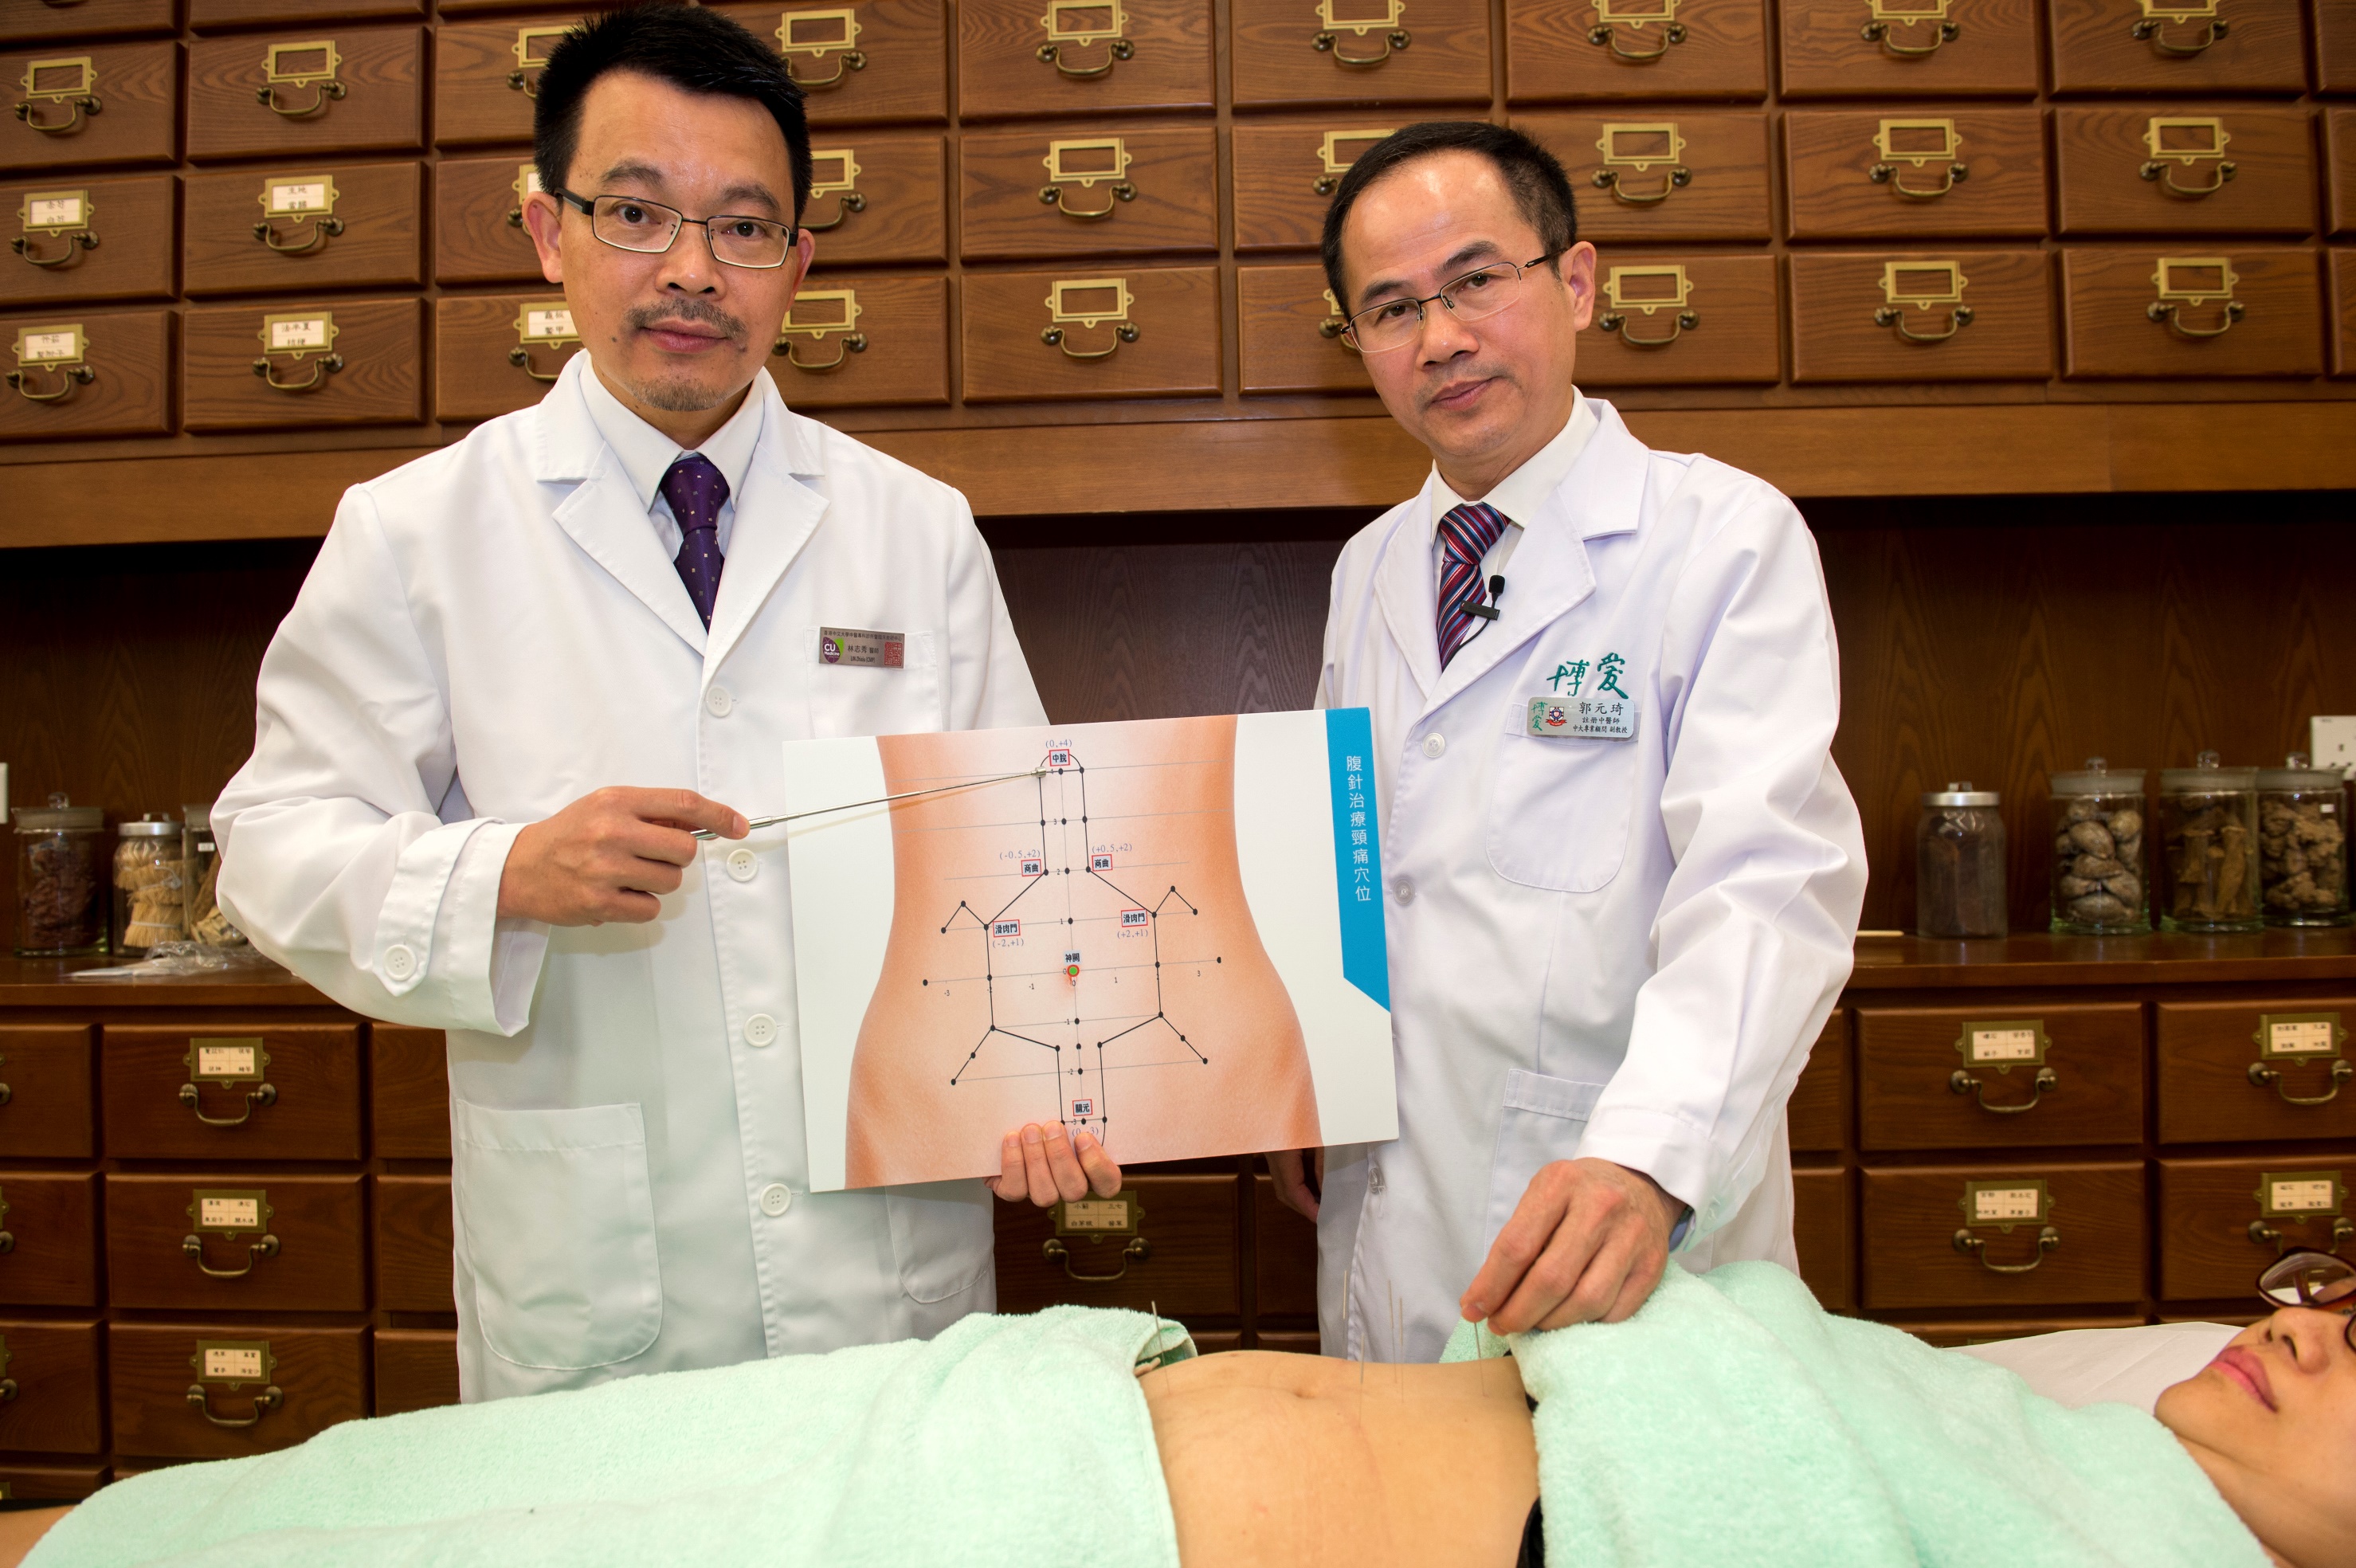  The School of Chinese Medicine of the Faculty of Medicine at CUHK join hands with Chinese Medicine Services of Pok Oi Hospital and conducted a clinical study to investigate the efficacy of abdominal acupuncture for treating neck pain. Prof. Zhi Xiu LIN (left), Acting Director, School of Chinese Medicine, Faculty of Medicine, CUHK and Prof. Yuanqi GUO (right), Chief of Chinese Medicine Services, Pok Oi Hospital ─ The Chinese University of Hong Kong Chinese Medicine Centre for Training and Research (Shatin).